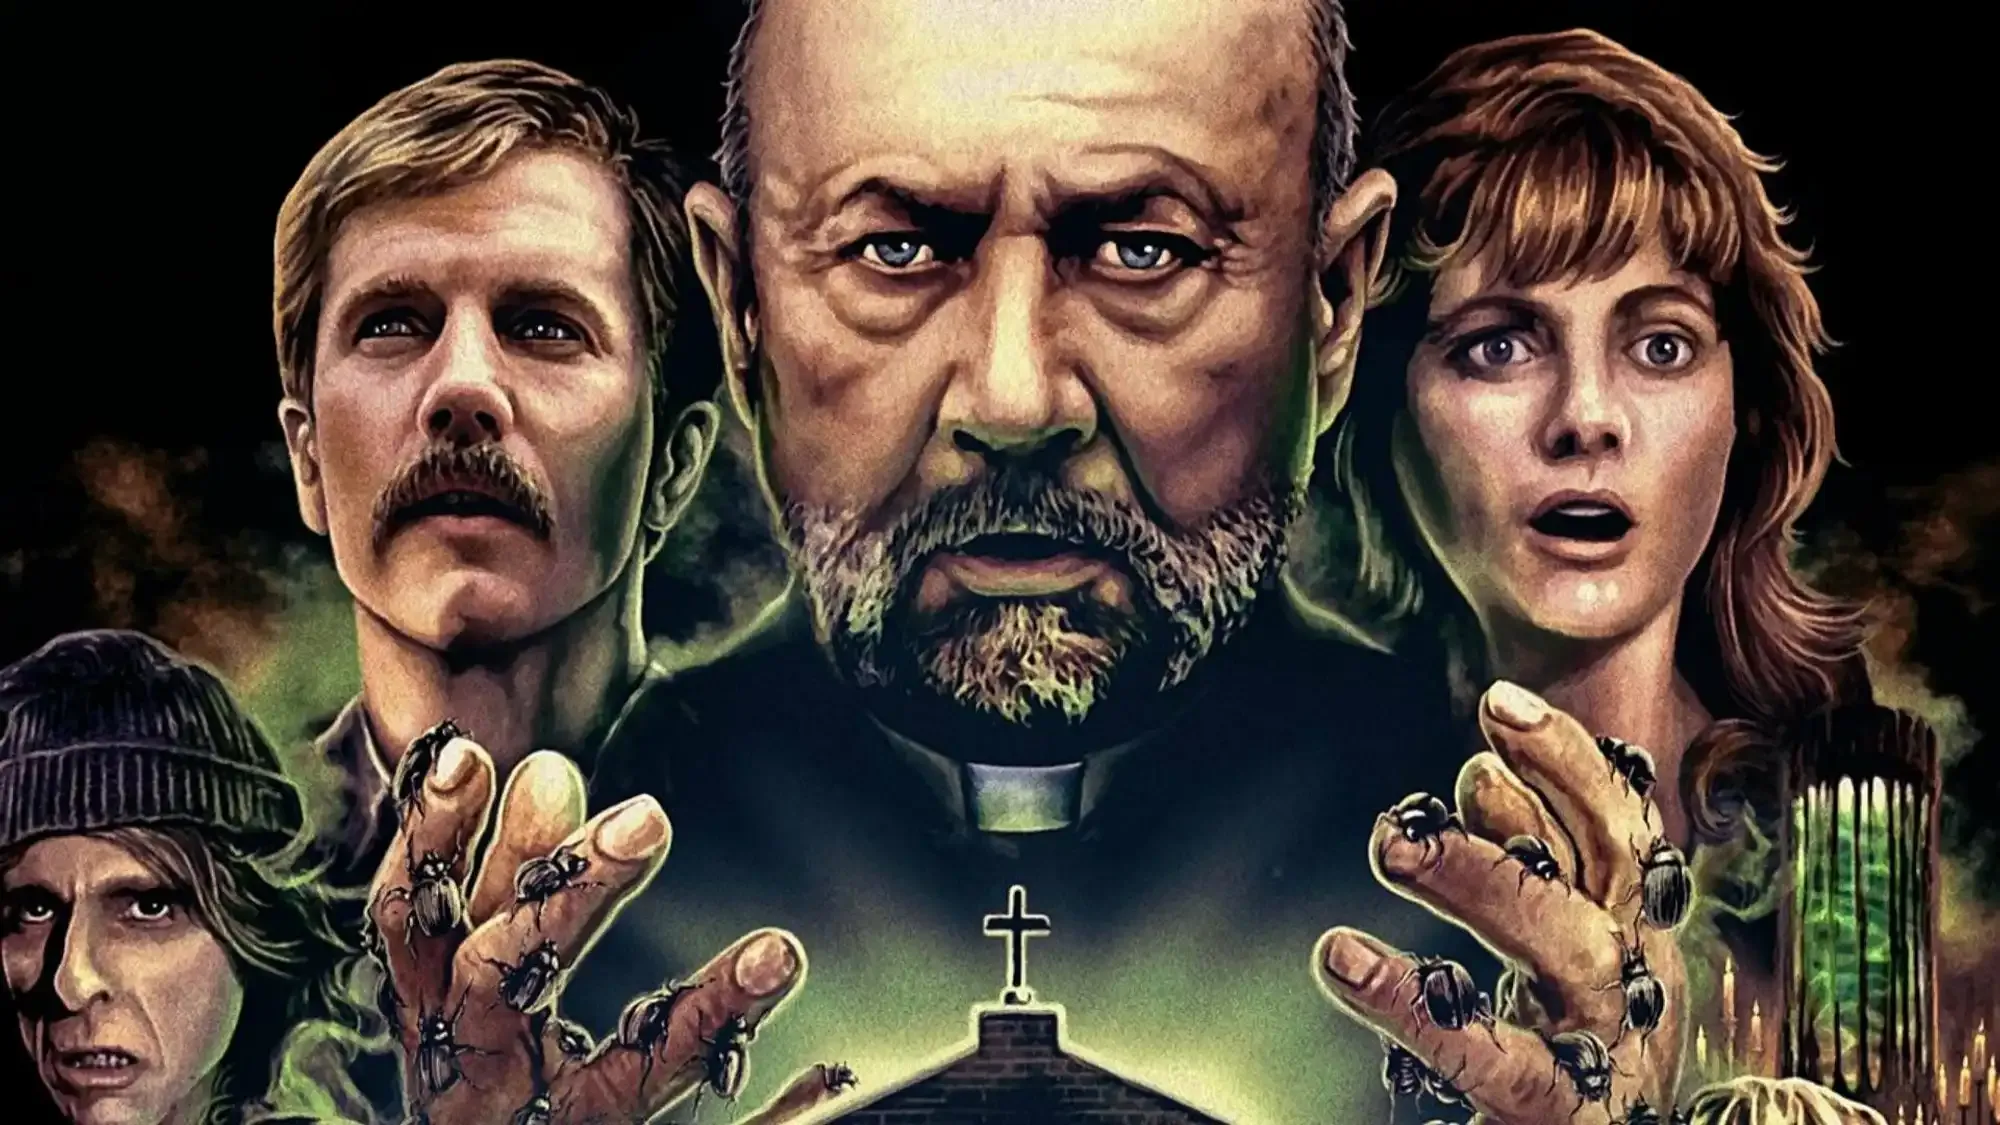 Prince of Darkness movie review